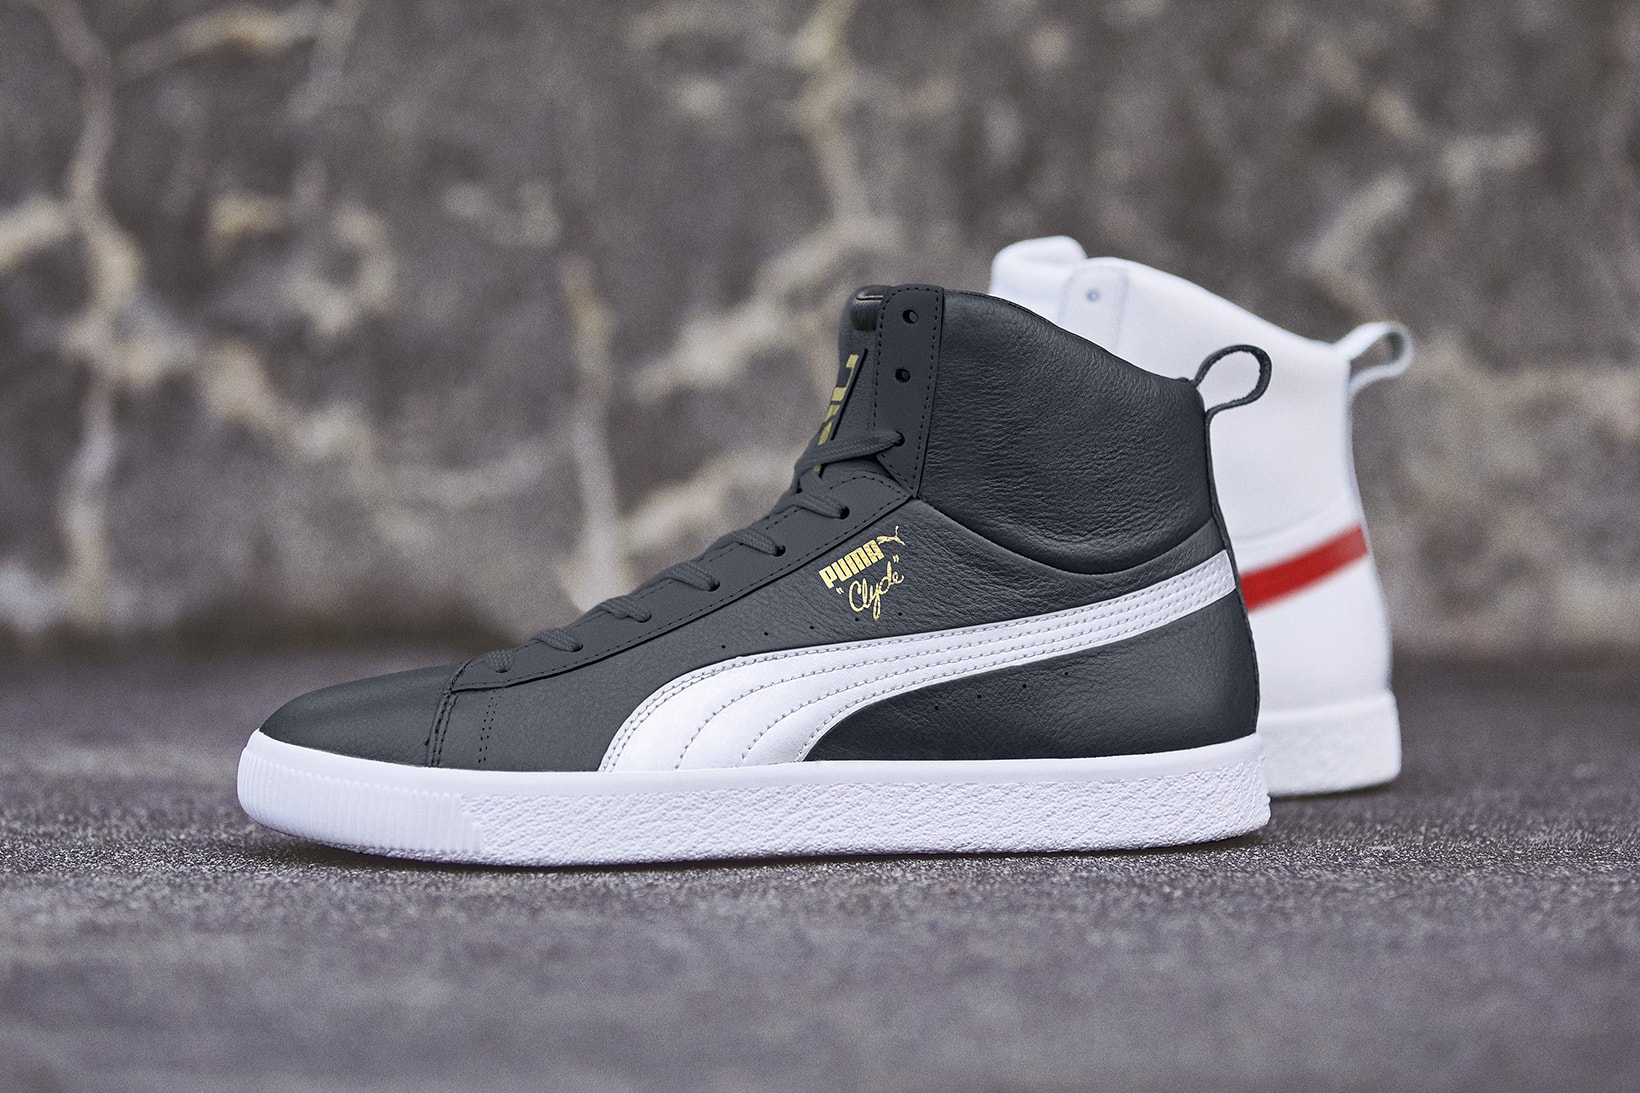 PUMA Clyde Mid Foil Sneakers Shoes Footwear 2017 August Release Date info black white red